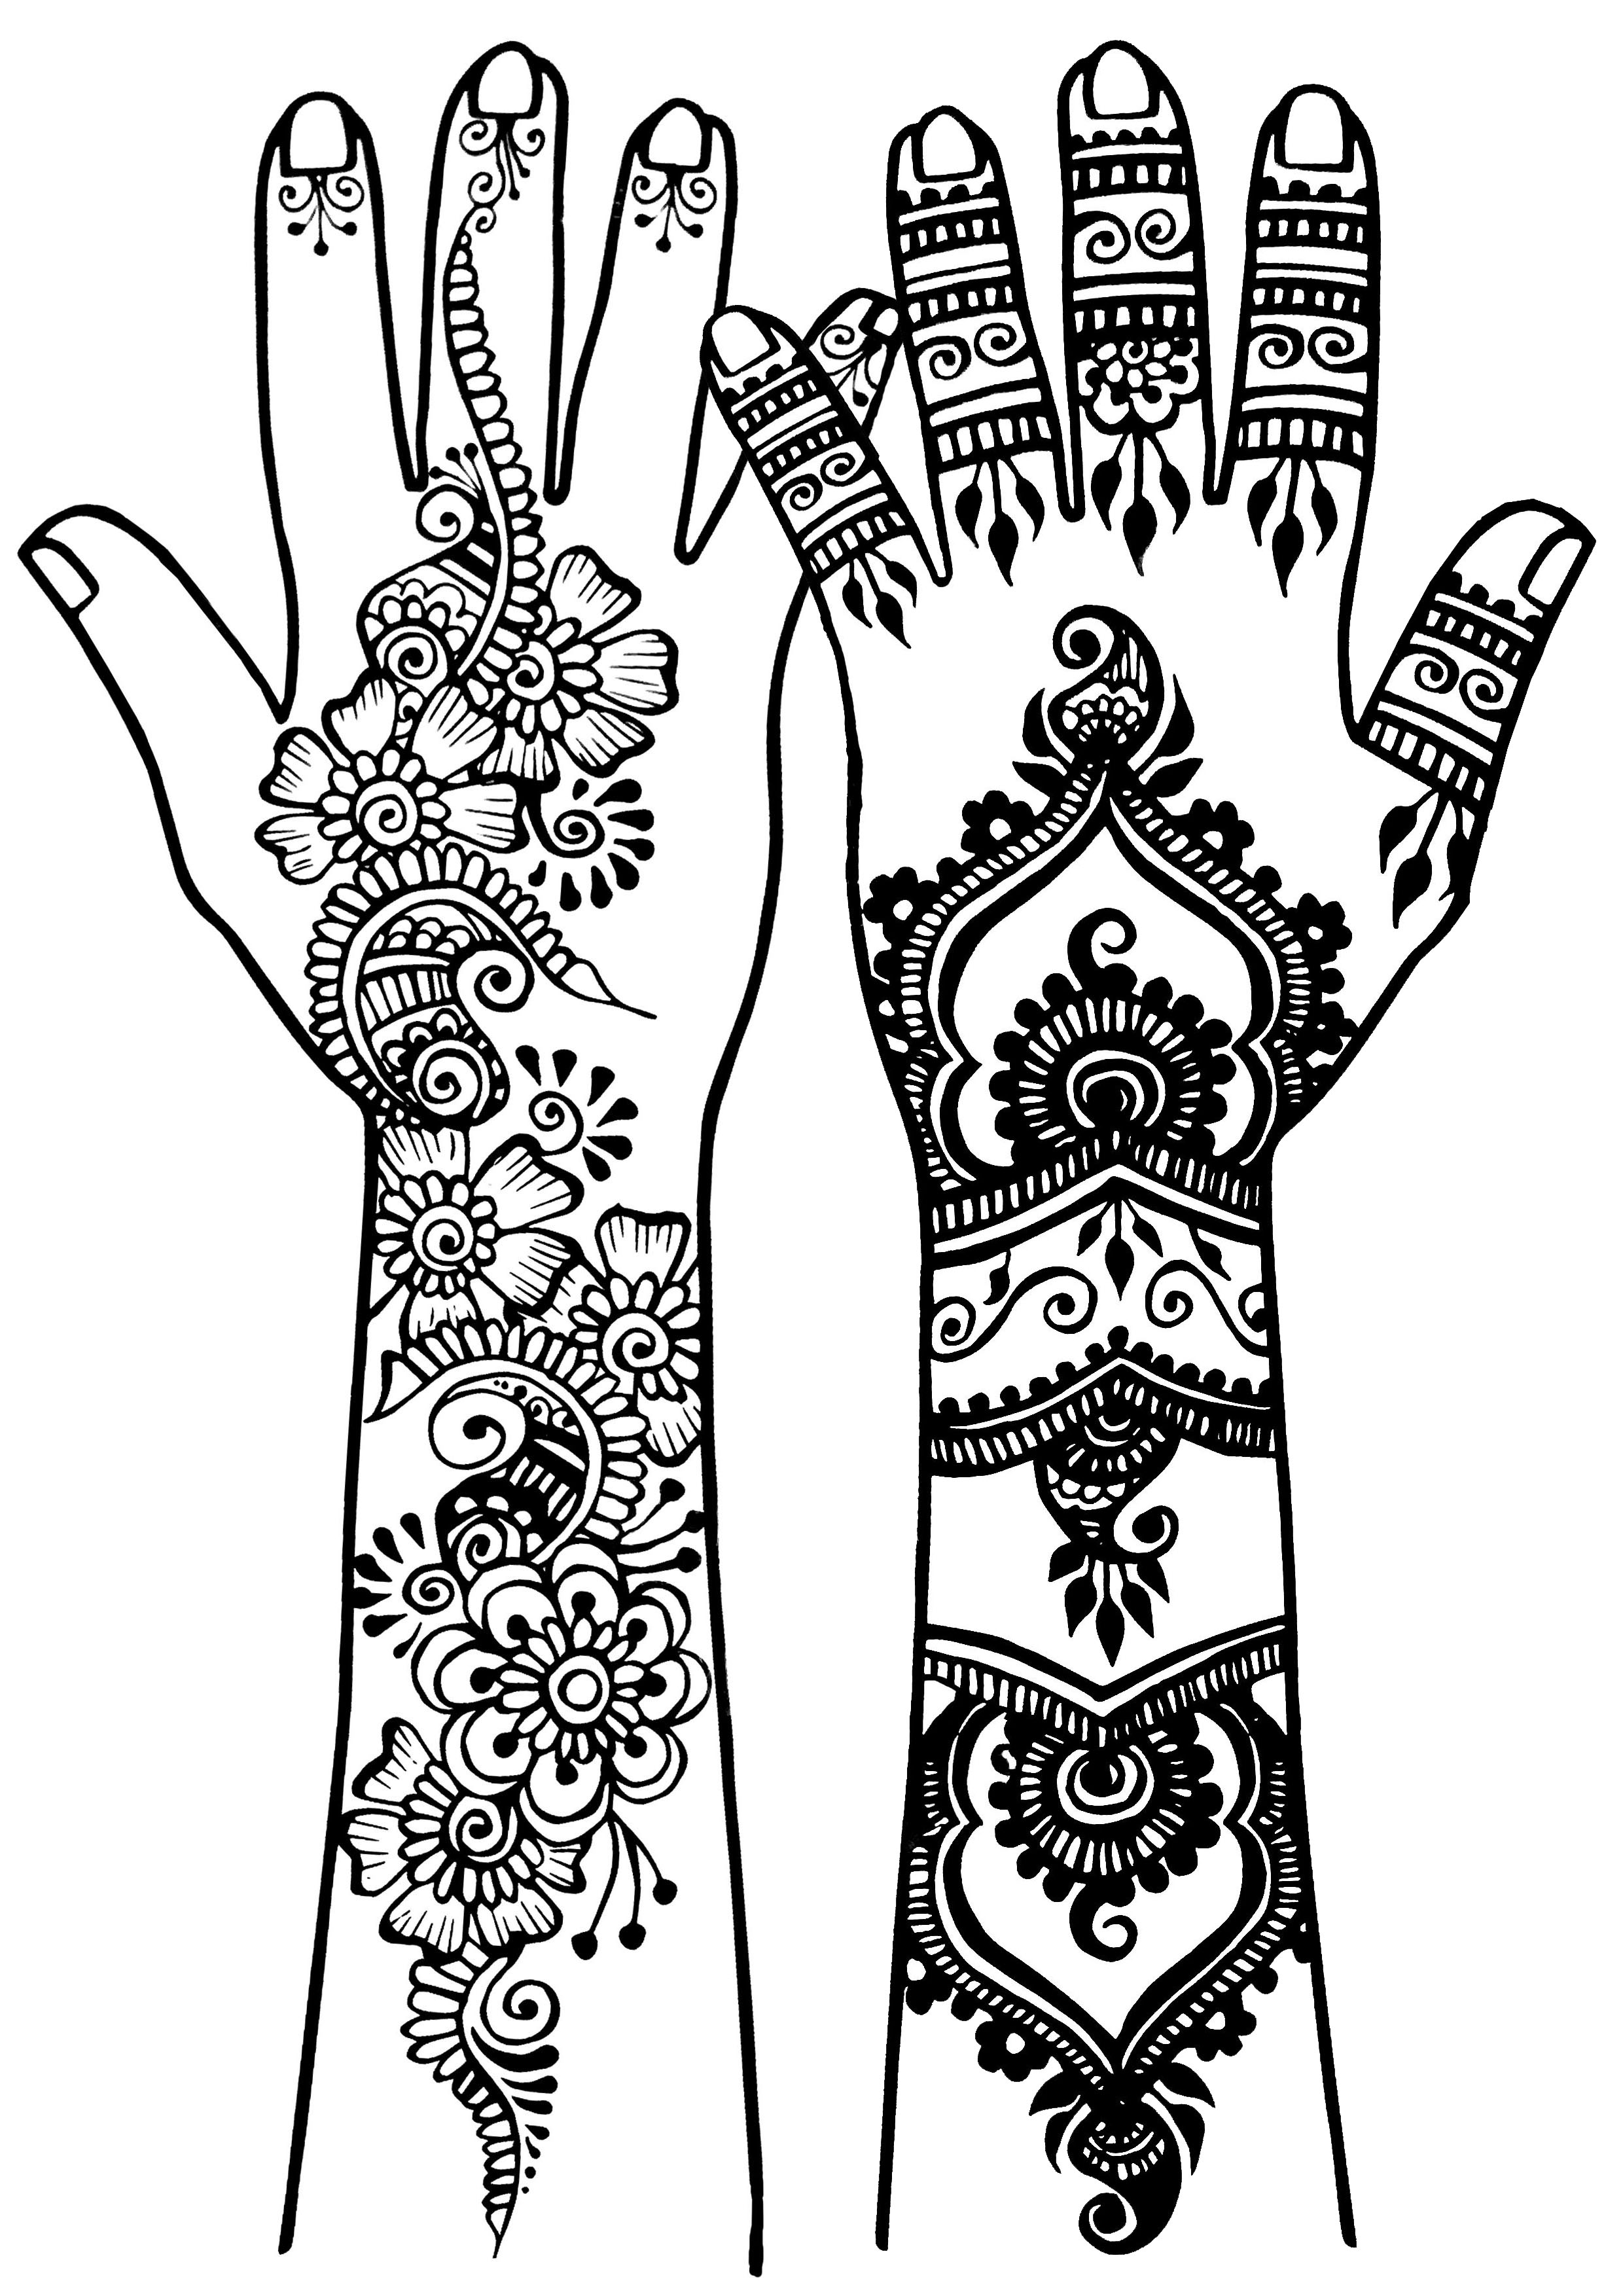 Arm and hand tatoo 3 - Tattoos Adult Coloring Pages